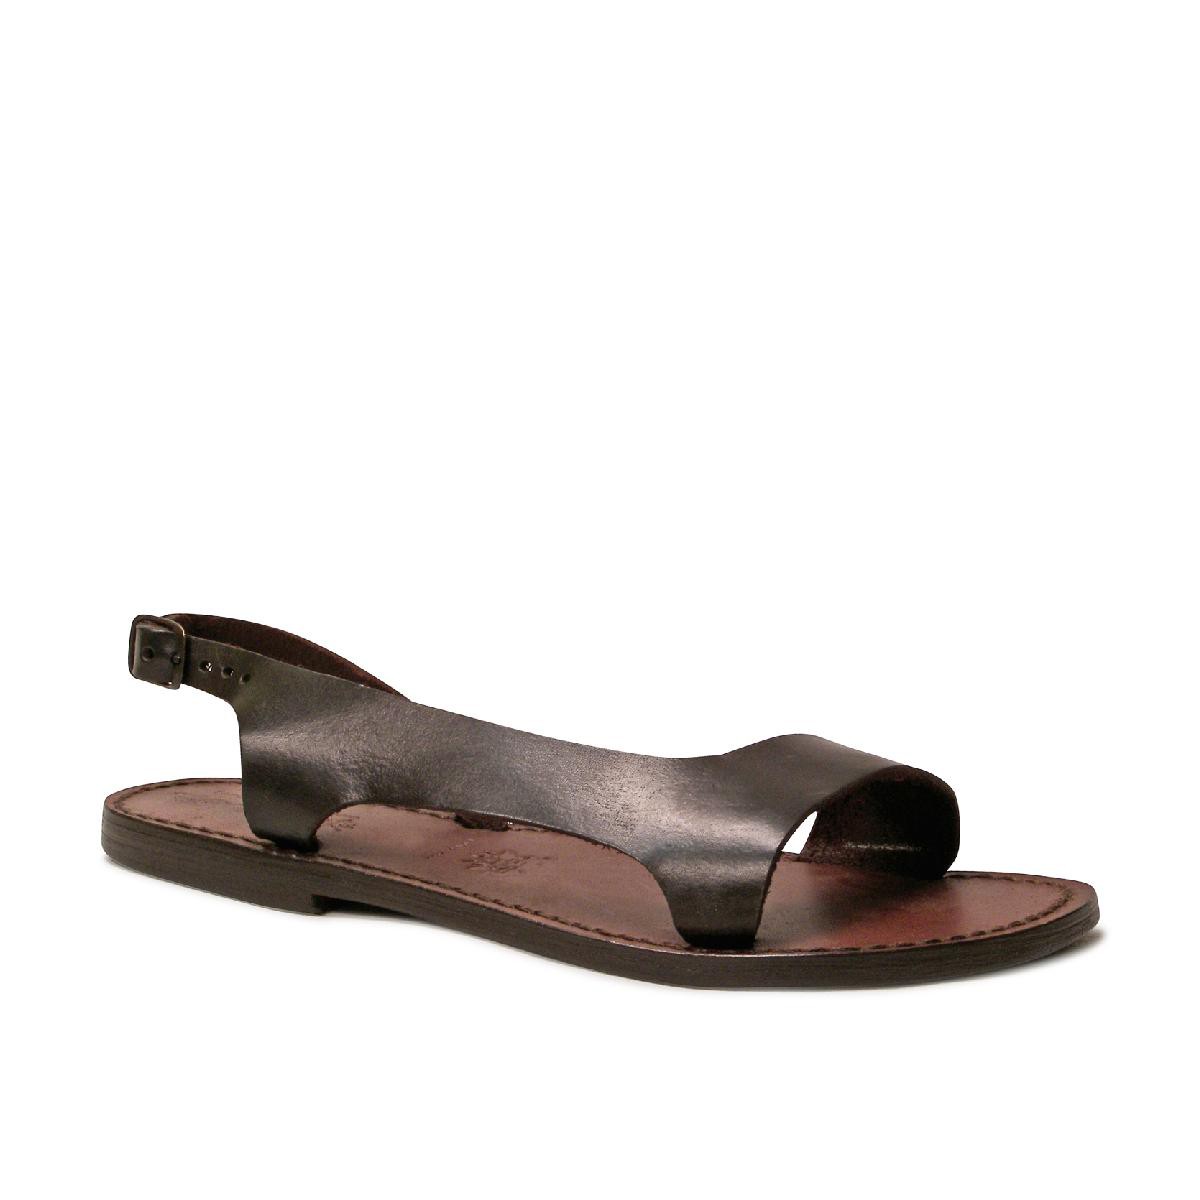 Brown leather sandals for women Handmade in Italy | The leather craftsmen